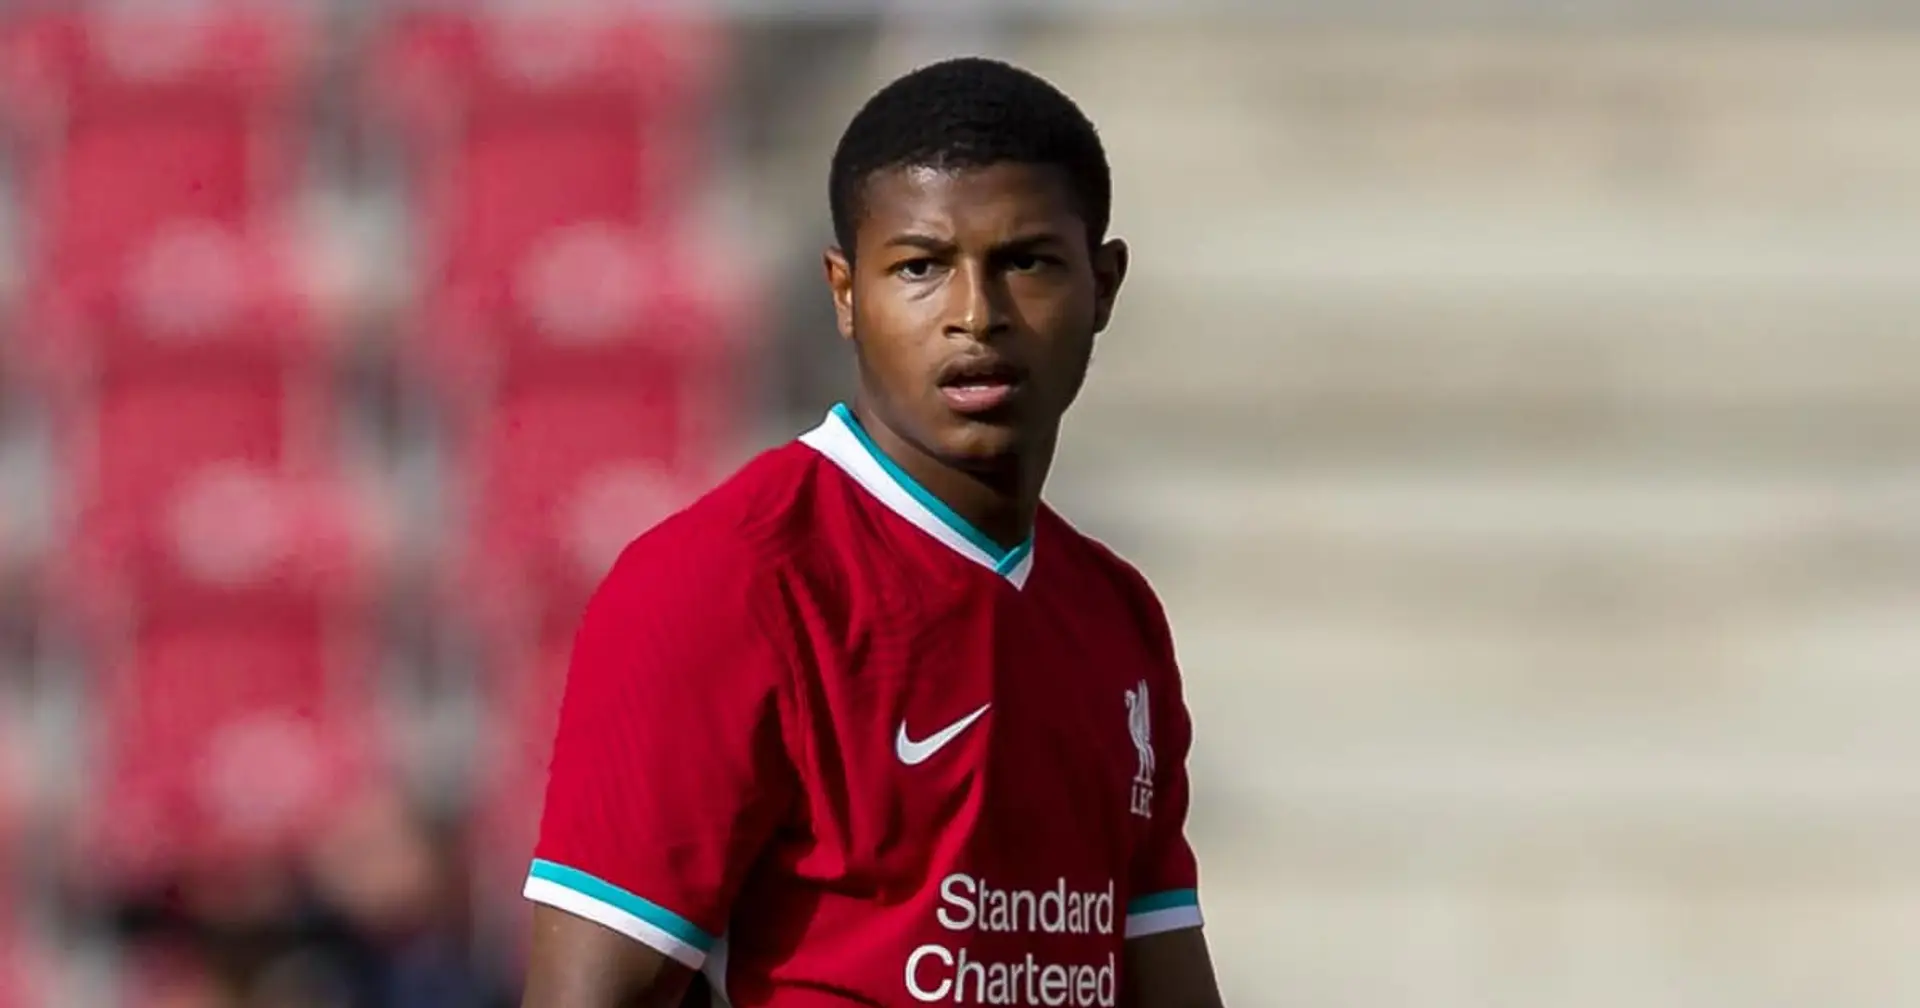 'Time is running out': Sheff Utd boss concerned amid lack of progress in Rhian Brewster talks